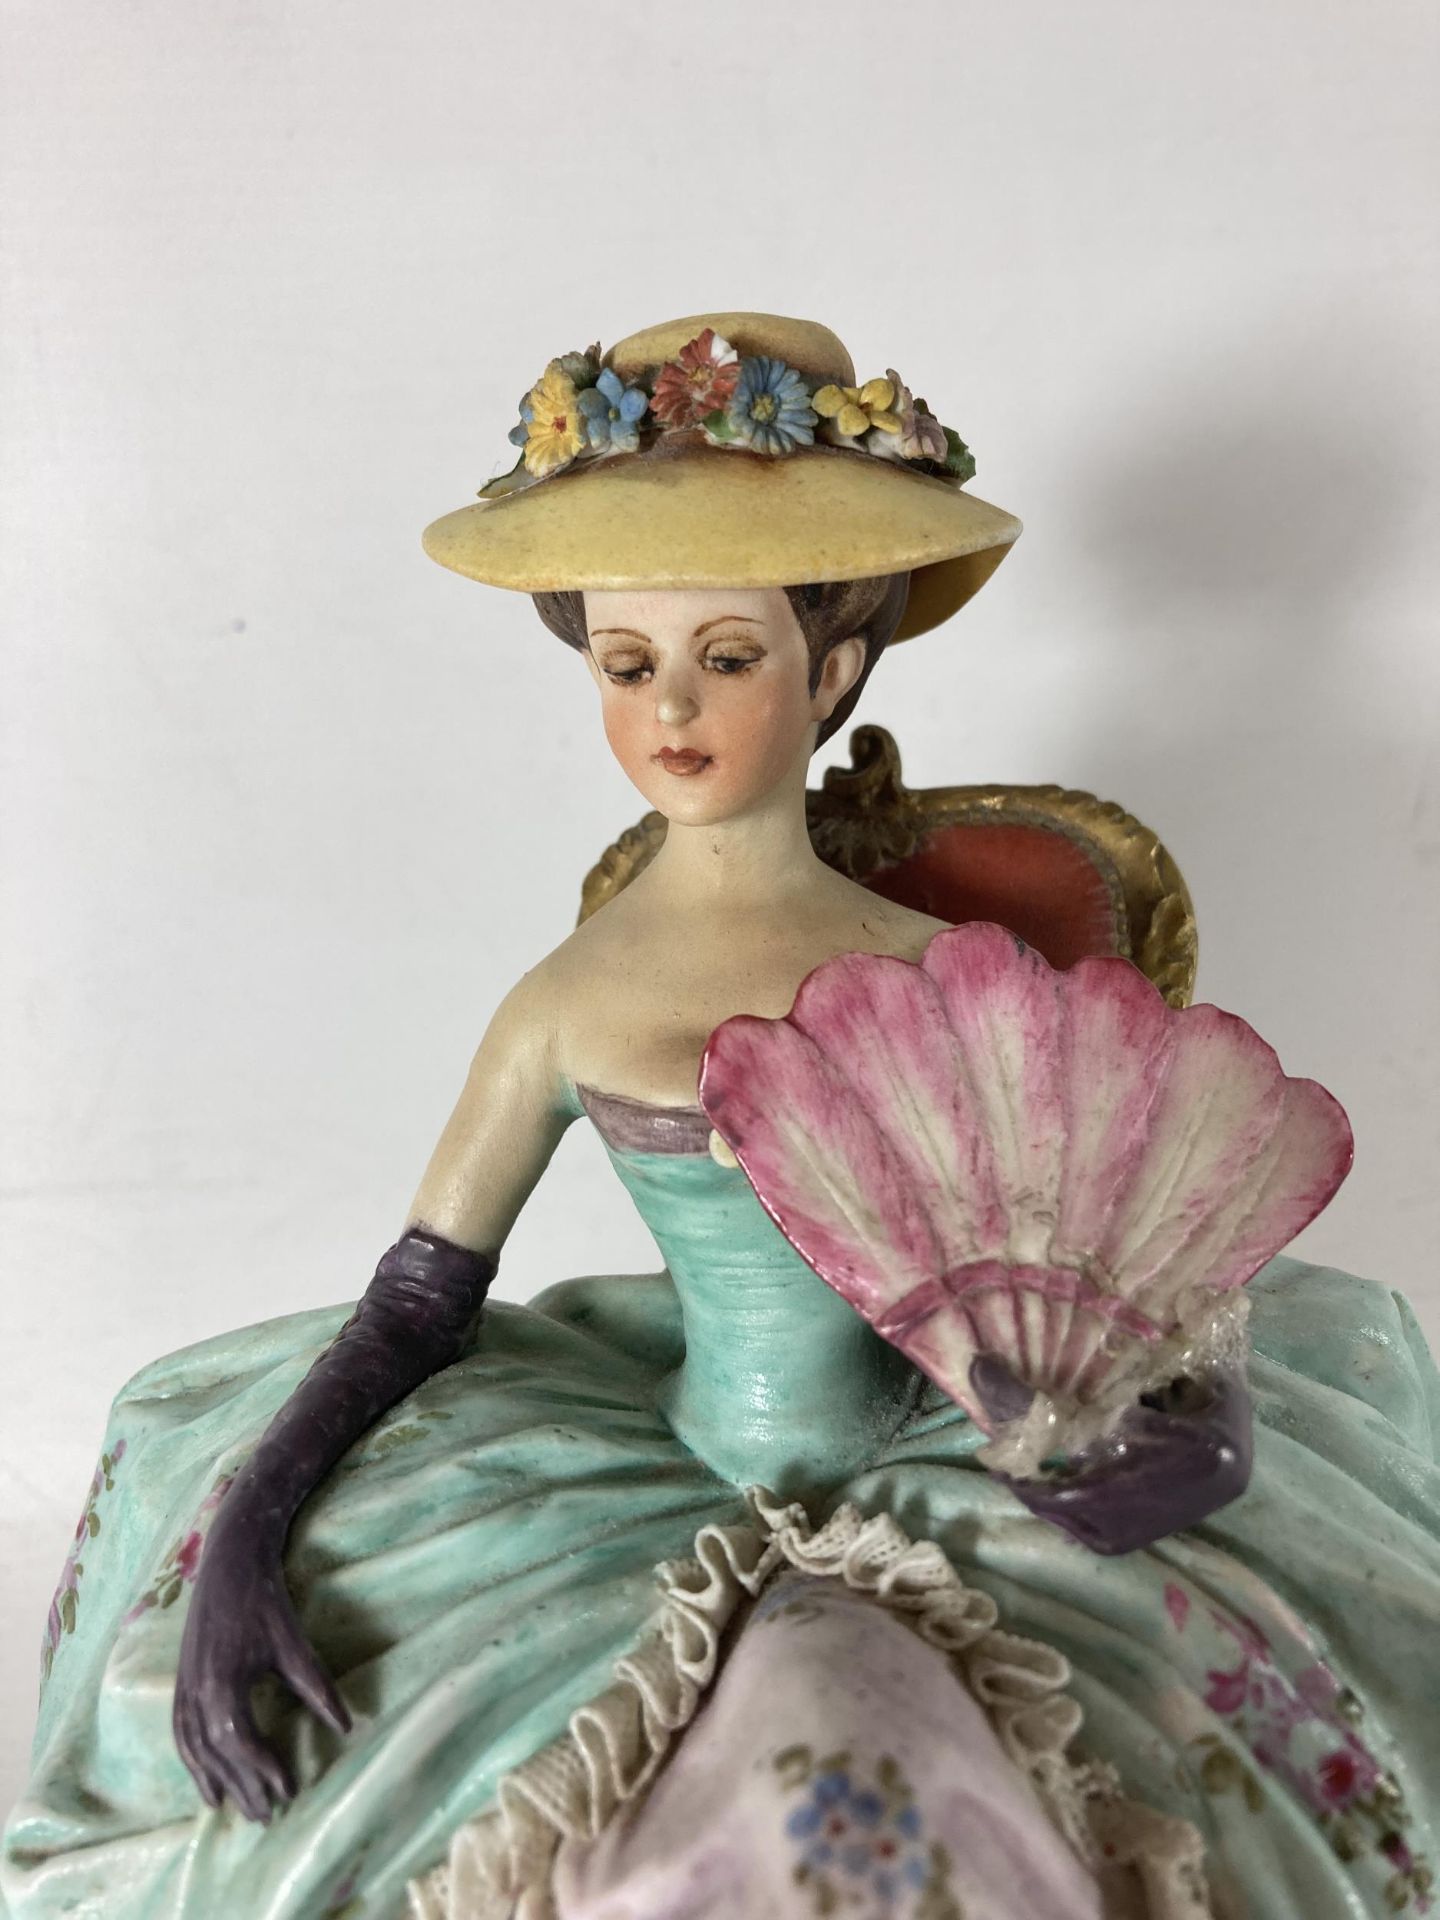 A VINTAGE CAPODIMONTE FIGURE OF A LADY AT REST - Image 2 of 4